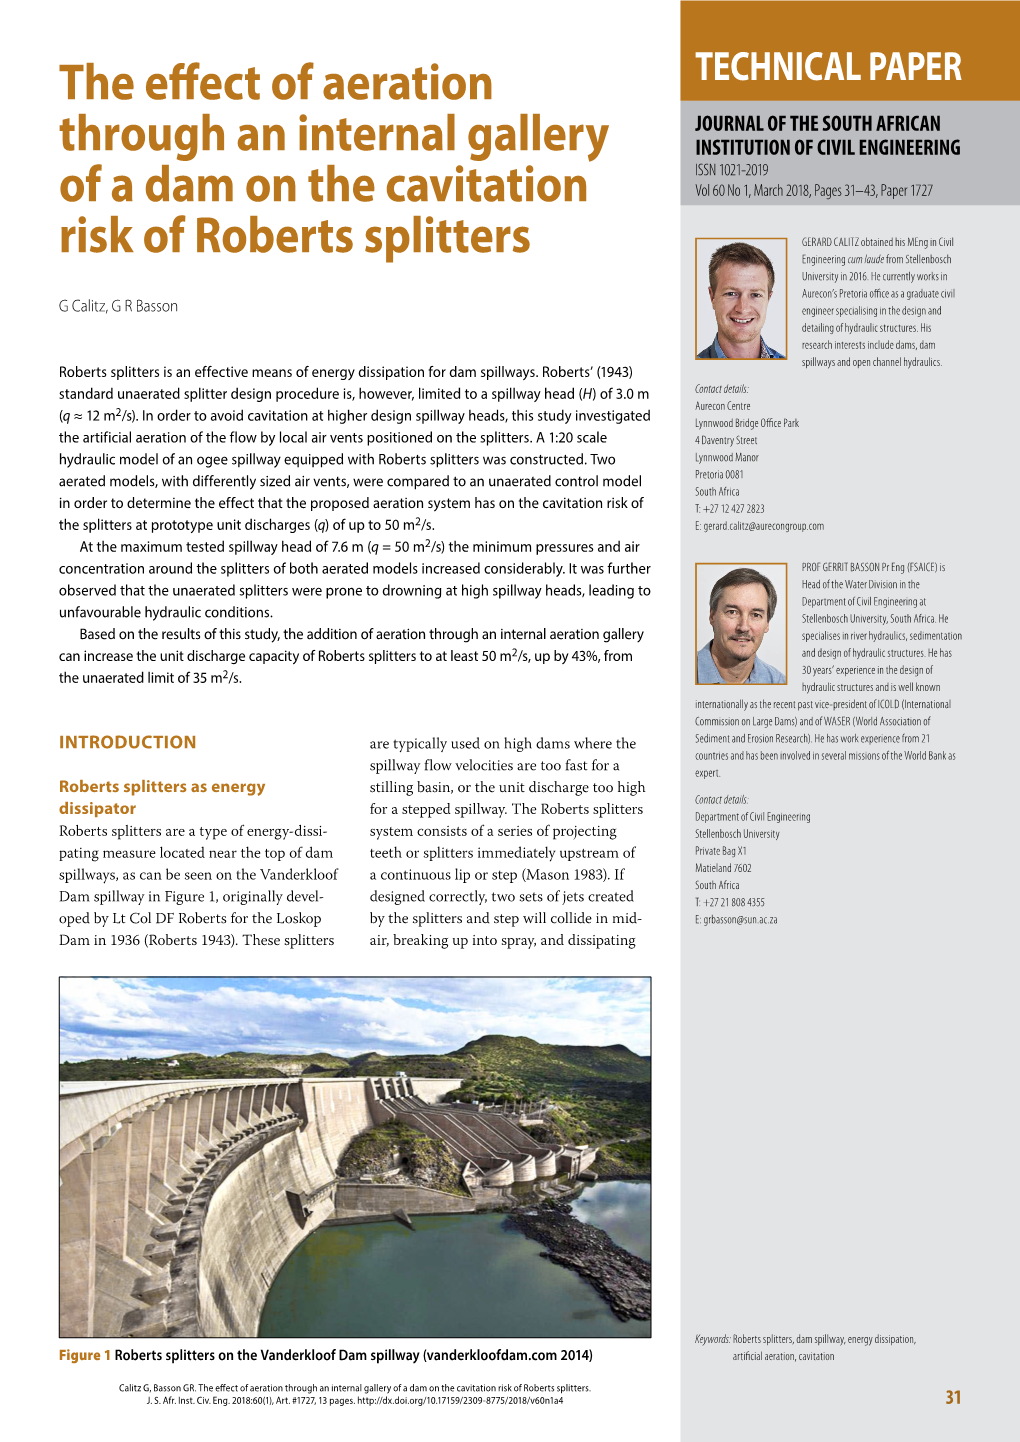 The Effect of Aeration Through an Internal Gallery of a Dam on the Cavitation Risk of Roberts Splitters